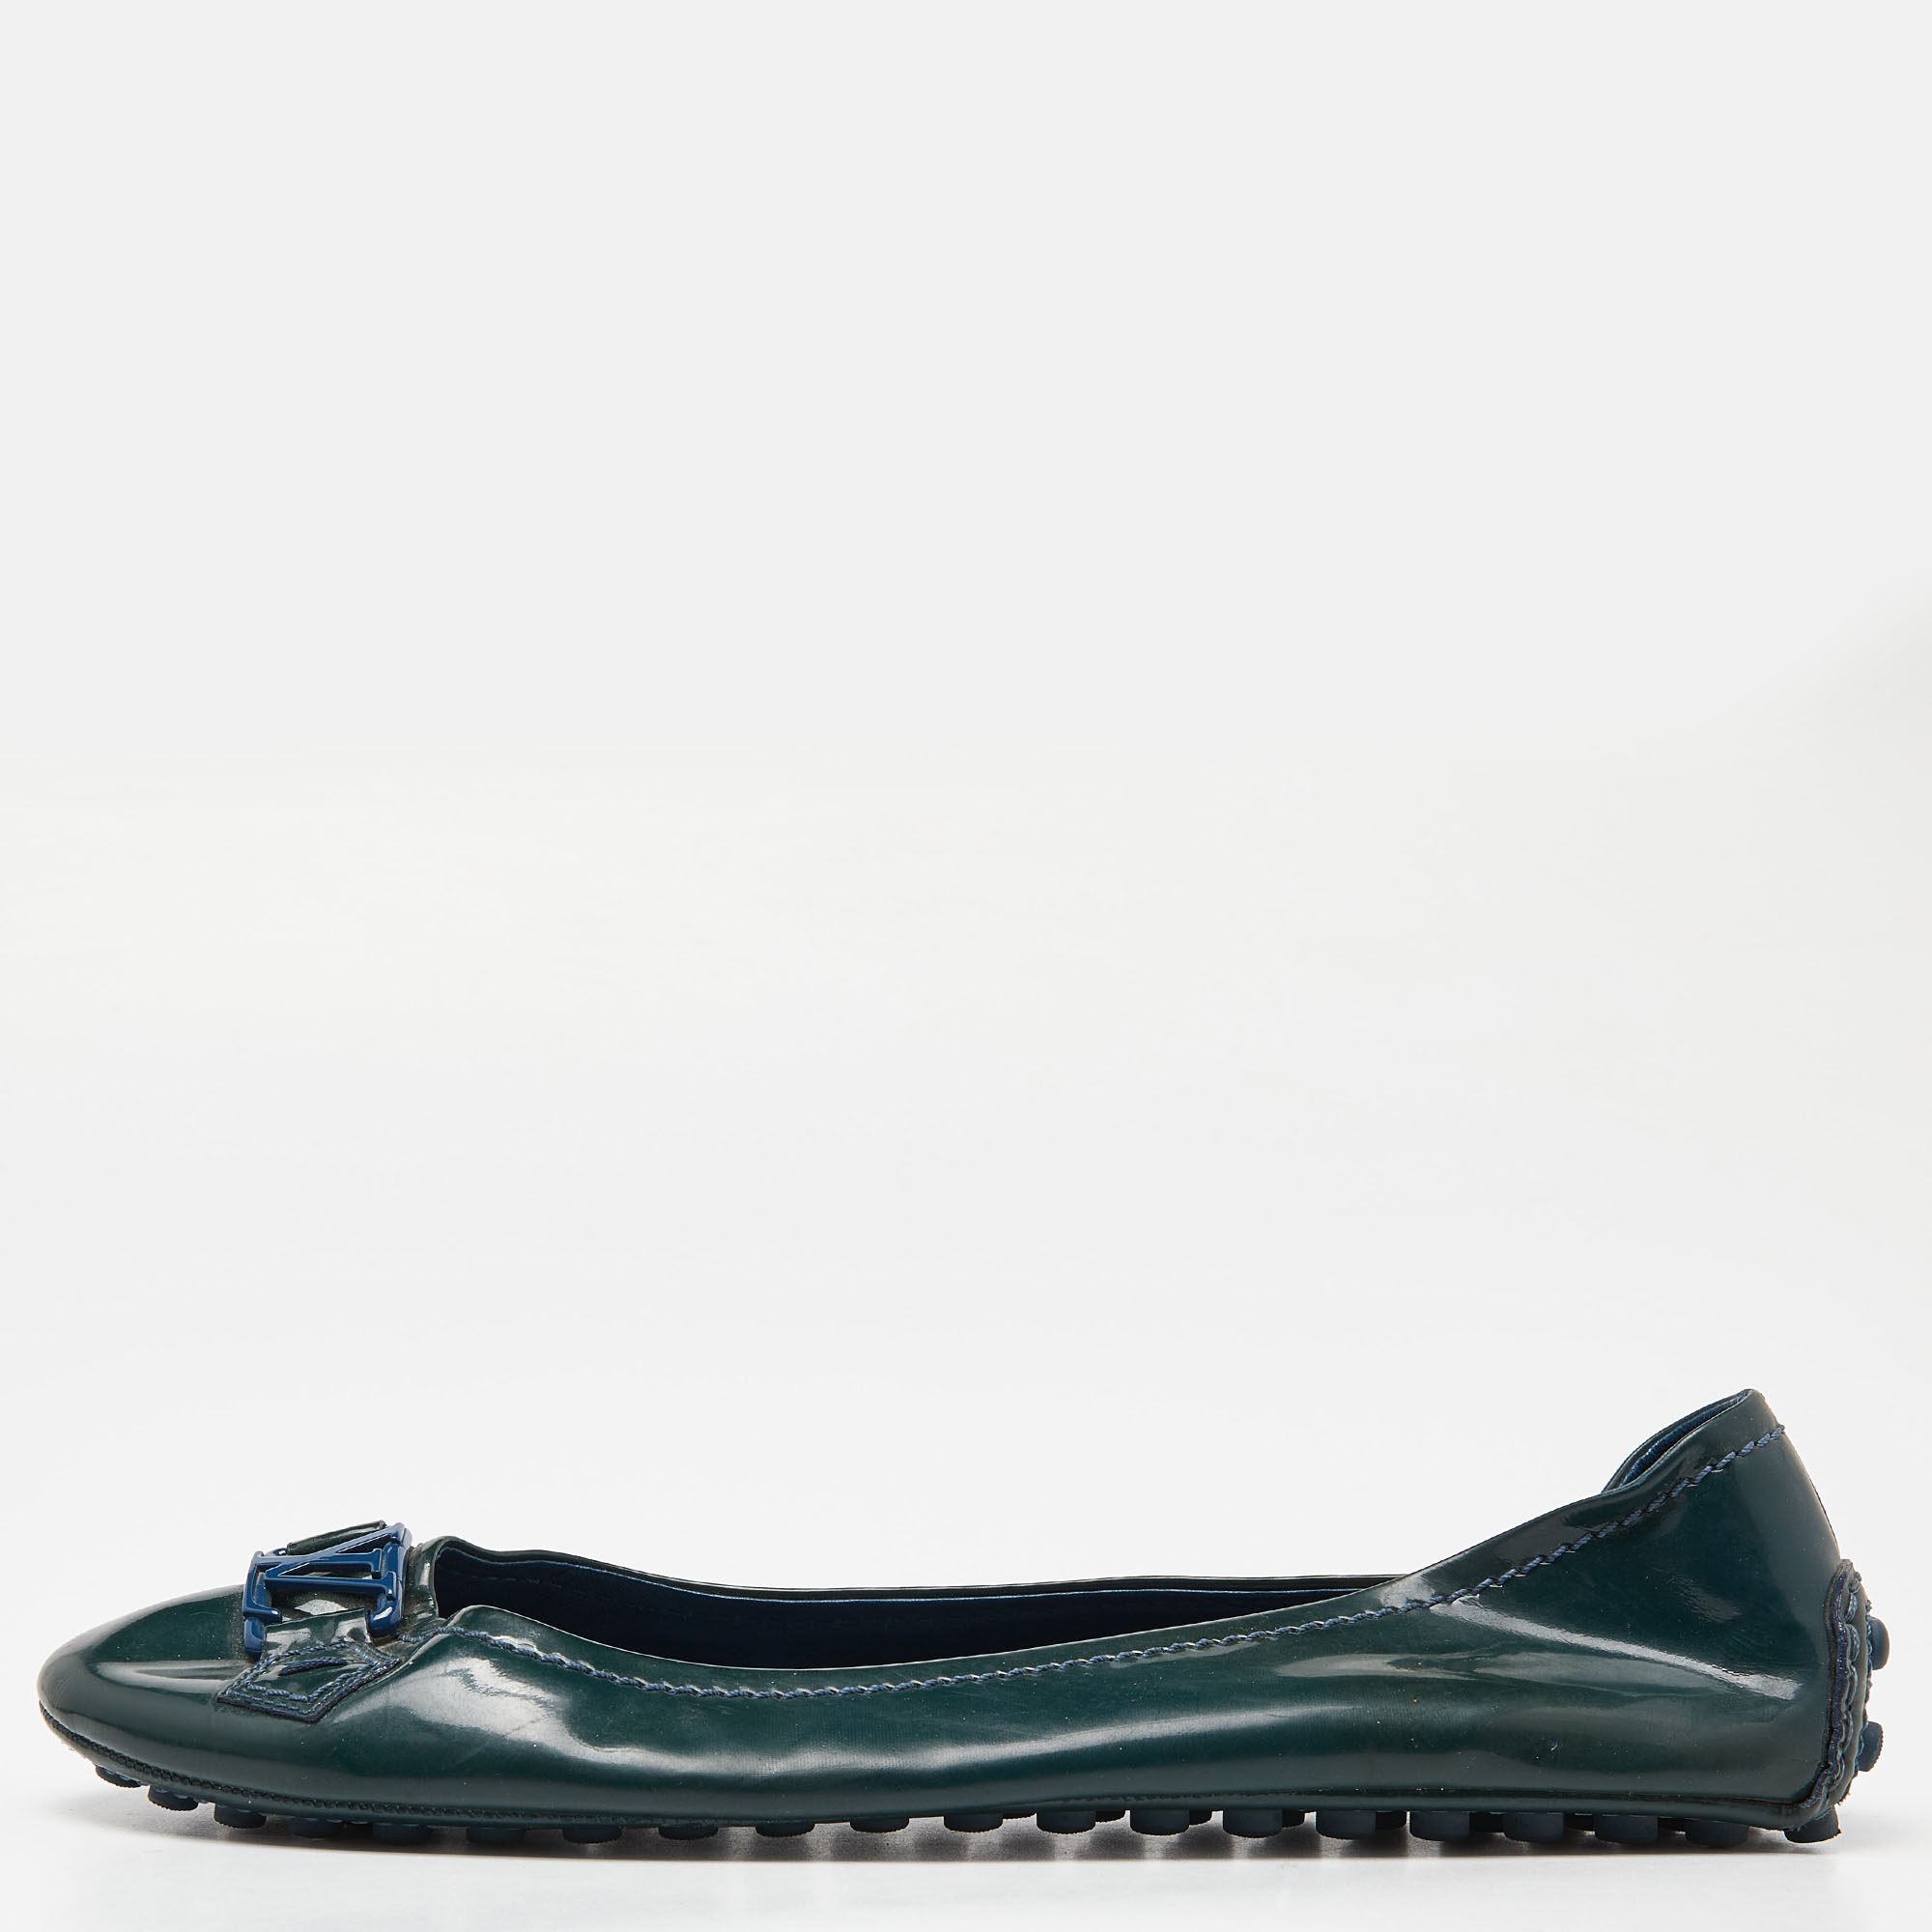 Pre-owned Louis Vuitton Dark Green Patent Leather Oxford Ballet Flats Size 39.5